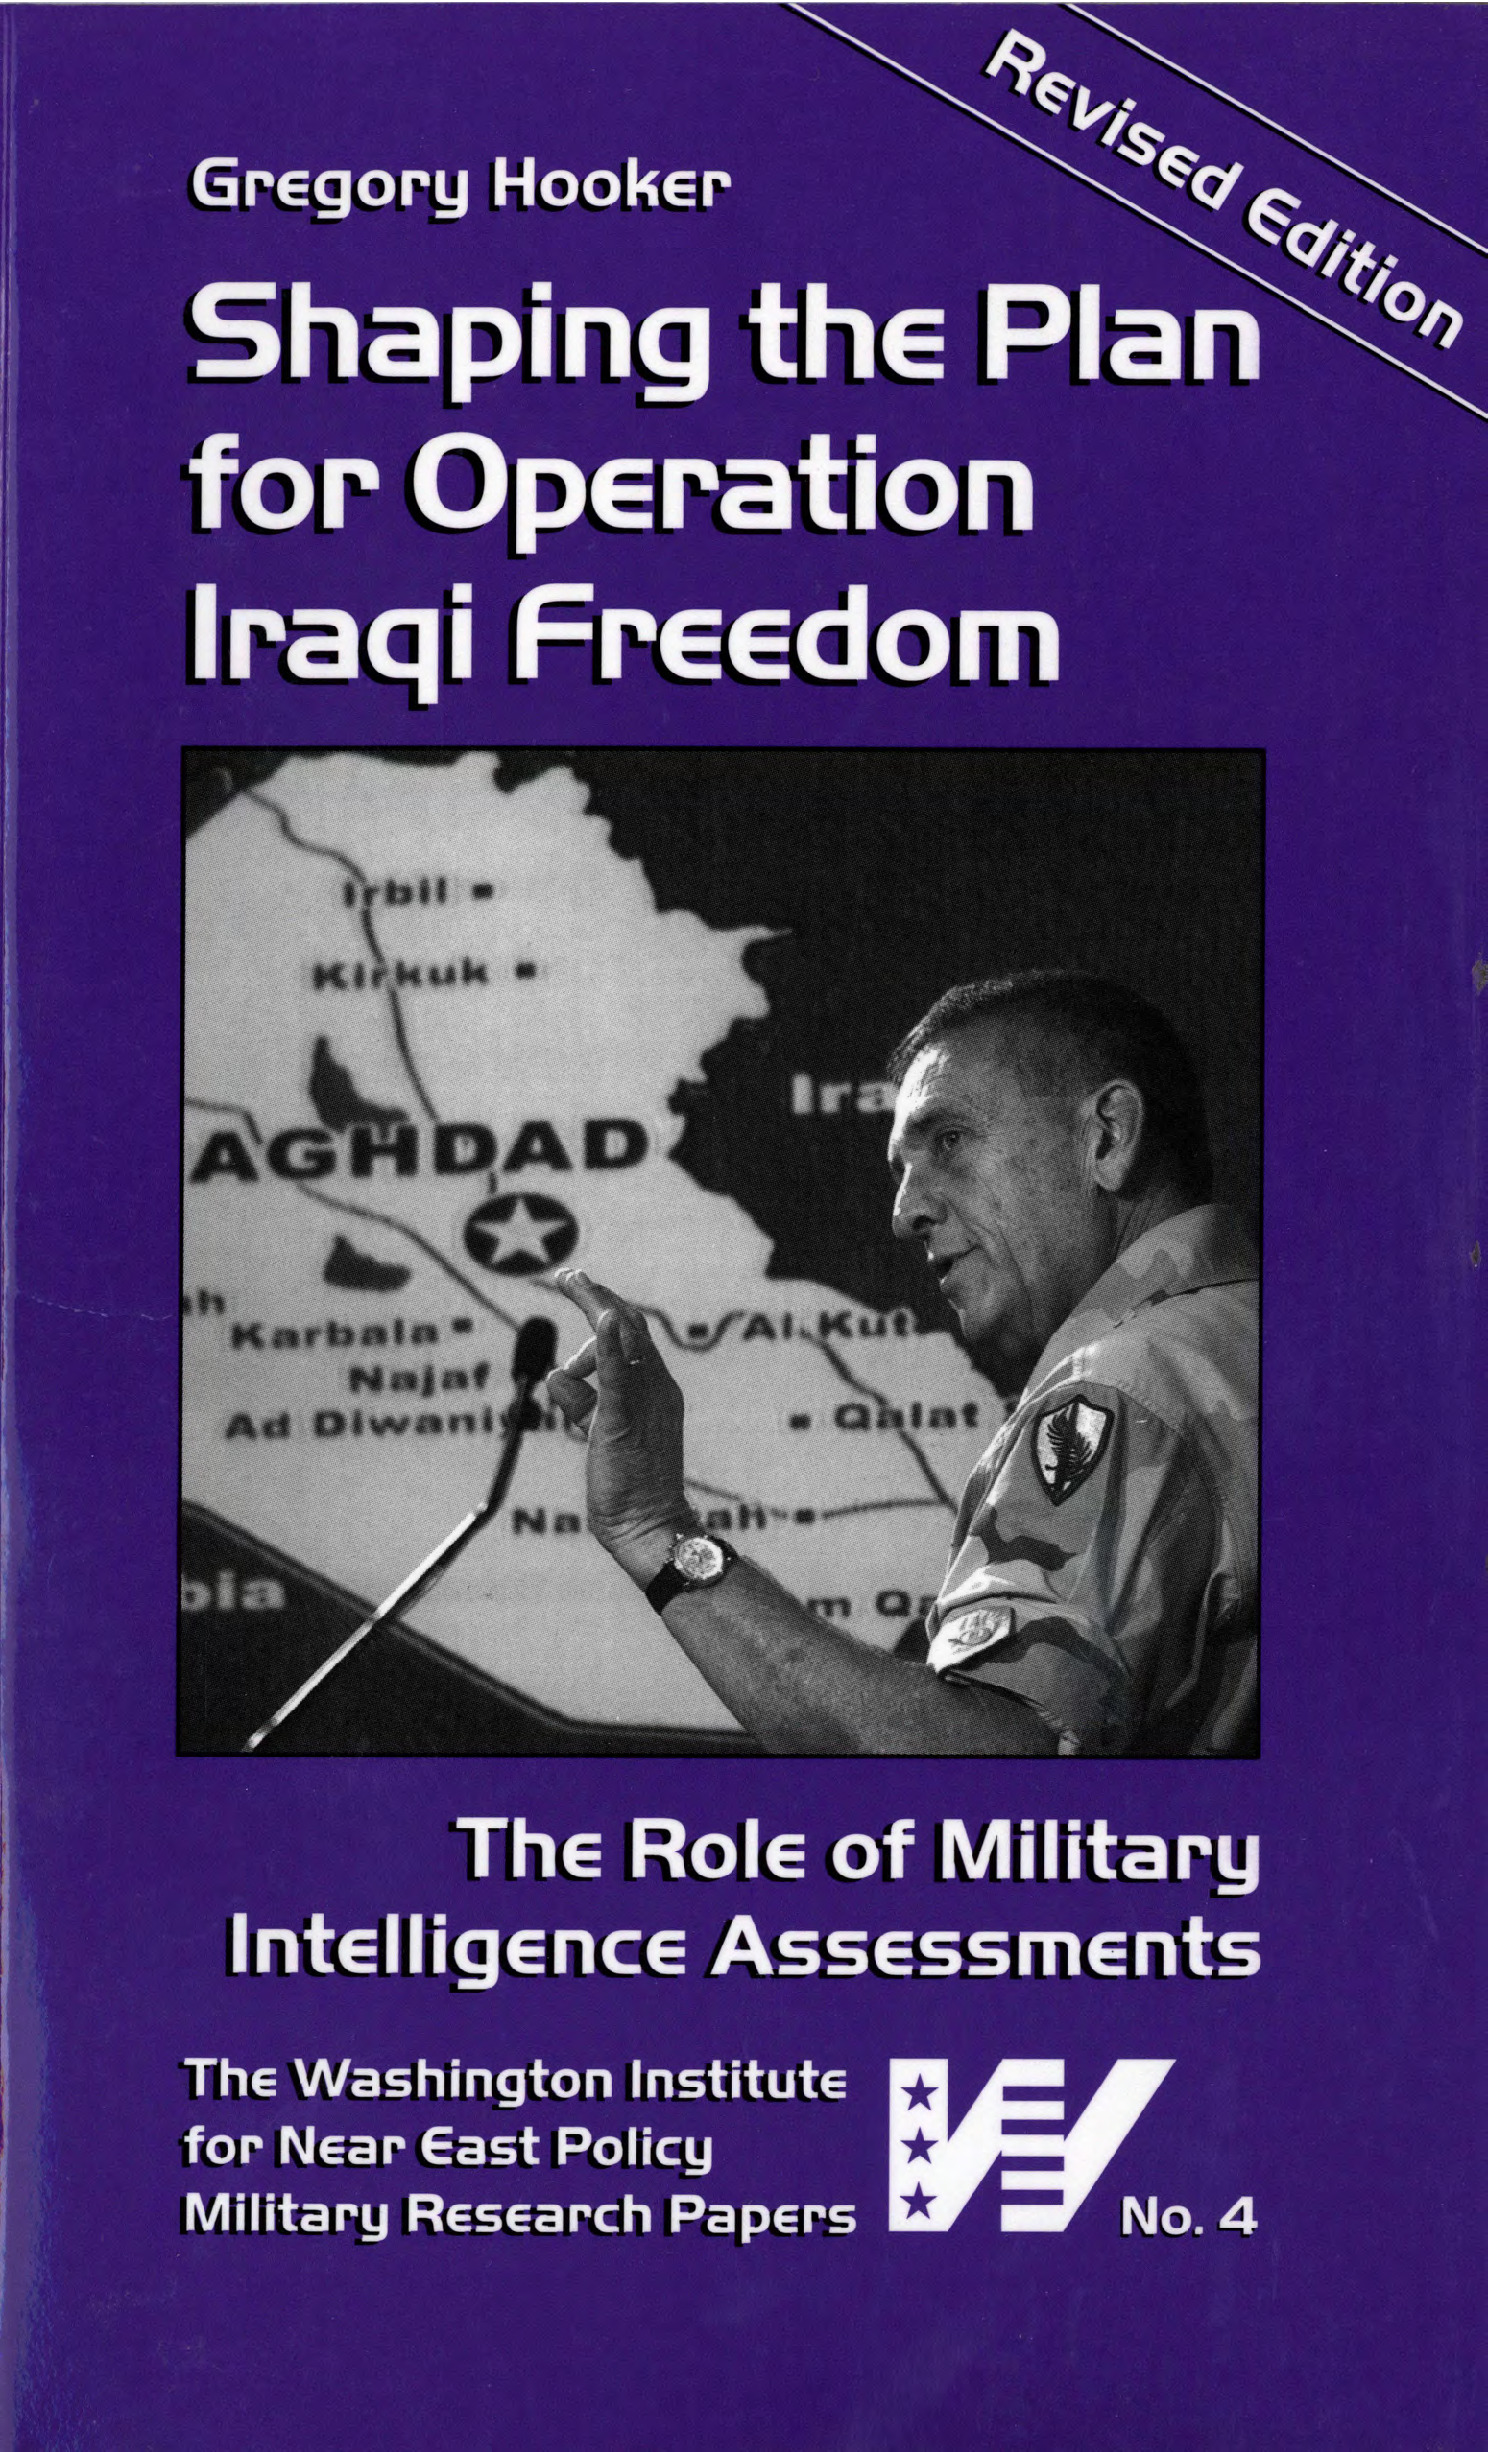 SHAPING_THE_PLAN_FOR_OPERATION_IRAQI_FREEDOM.pdf